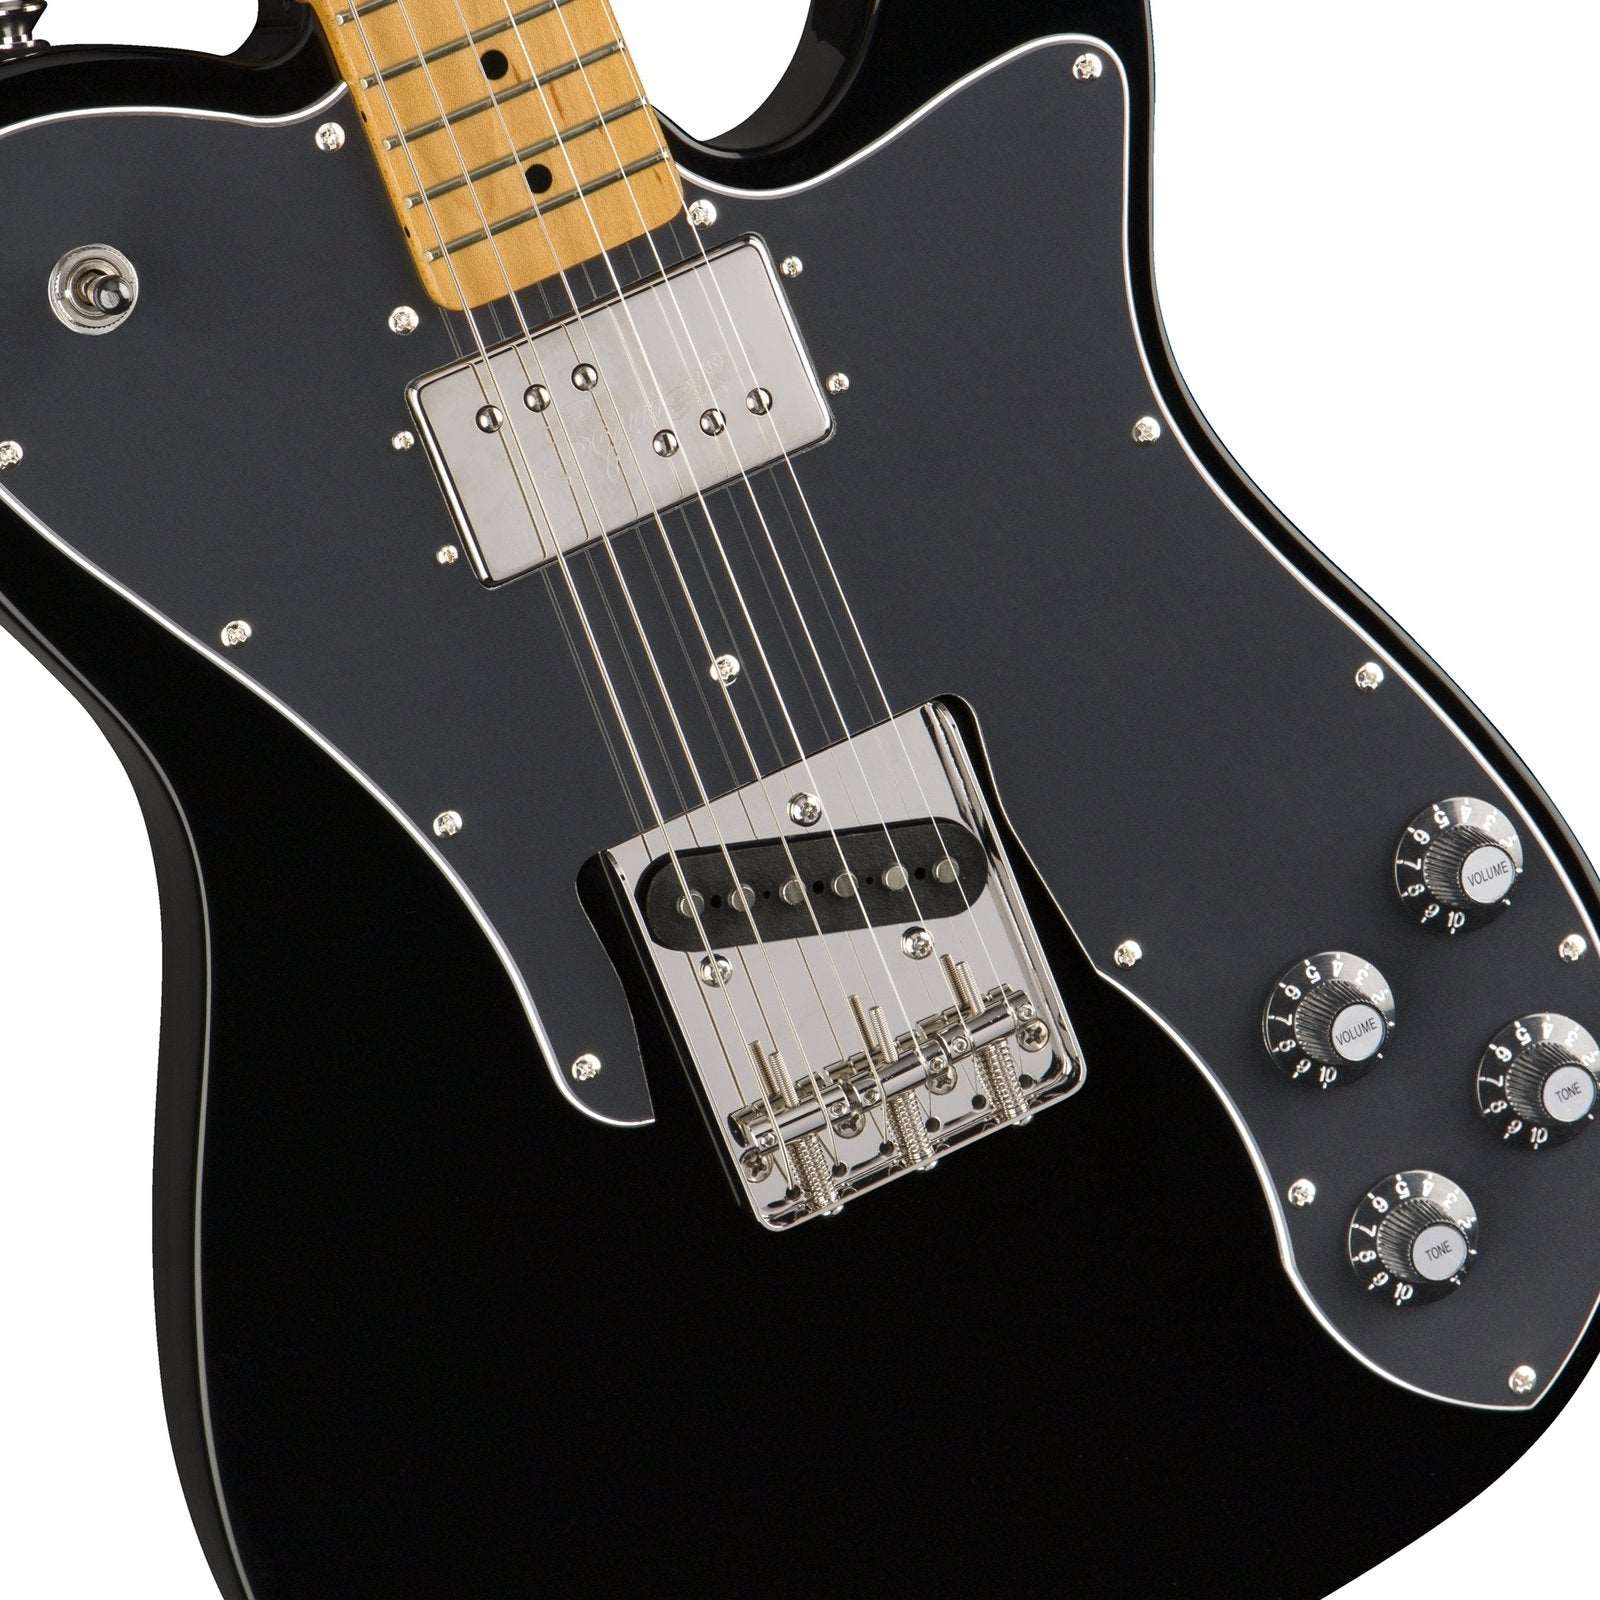 Squier Classic Vibe 70s Telecaster Custom Electric Guitar, Maple FB, Black, SQUIER BY FENDER, ELECTRIC GUITAR, squier-by-fender-electric-guitar-037-4050-506, ZOSO MUSIC SDN BHD